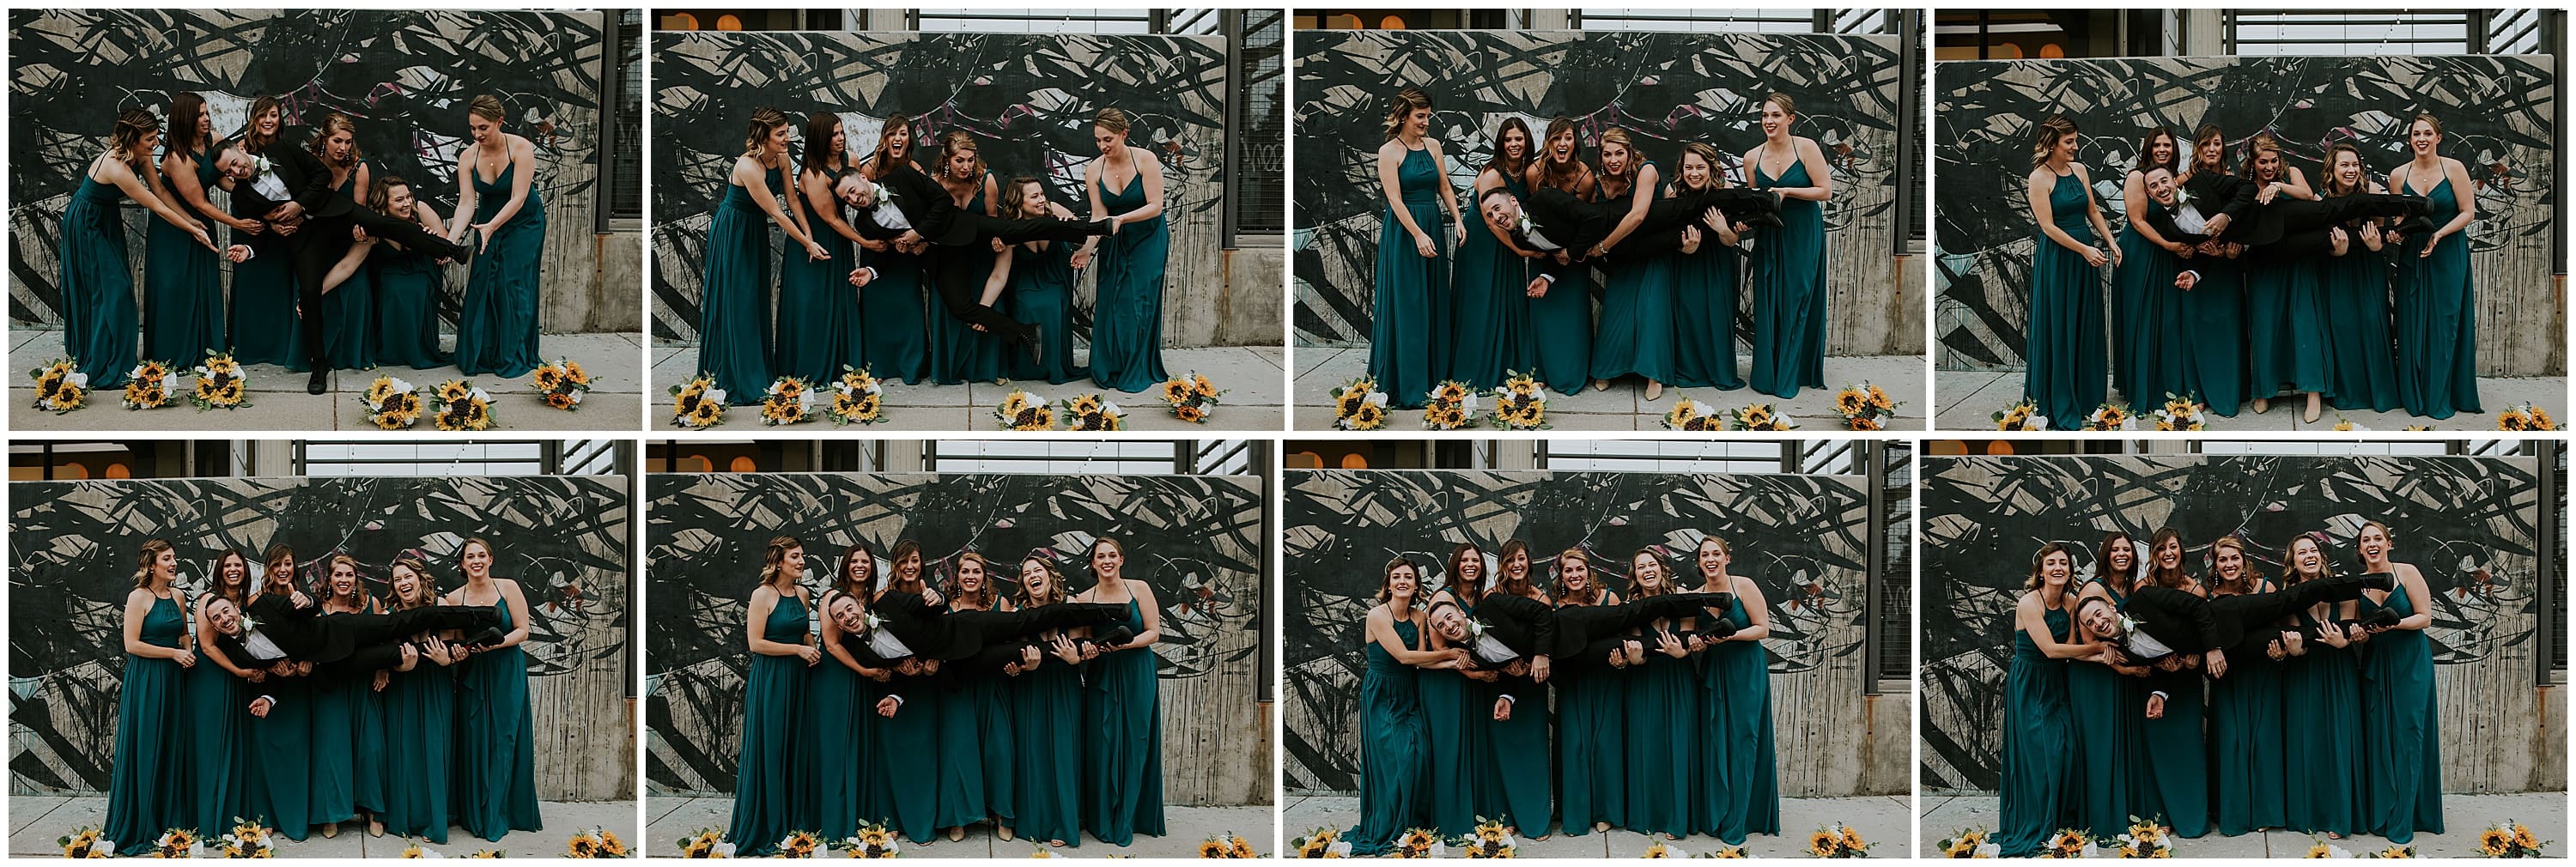 Space Gallery Denver, Space Gallery wedding, Denver Fall wedding, Fall Space Gallery wedding, Downtown Denver wedding, Dance party wedding, Sunflower crown, fake wedding flowers, shanna m. photography, teal bridesmaids dresses, Mariachi band, mens tux, glowstick exit, art gallery wedding, 